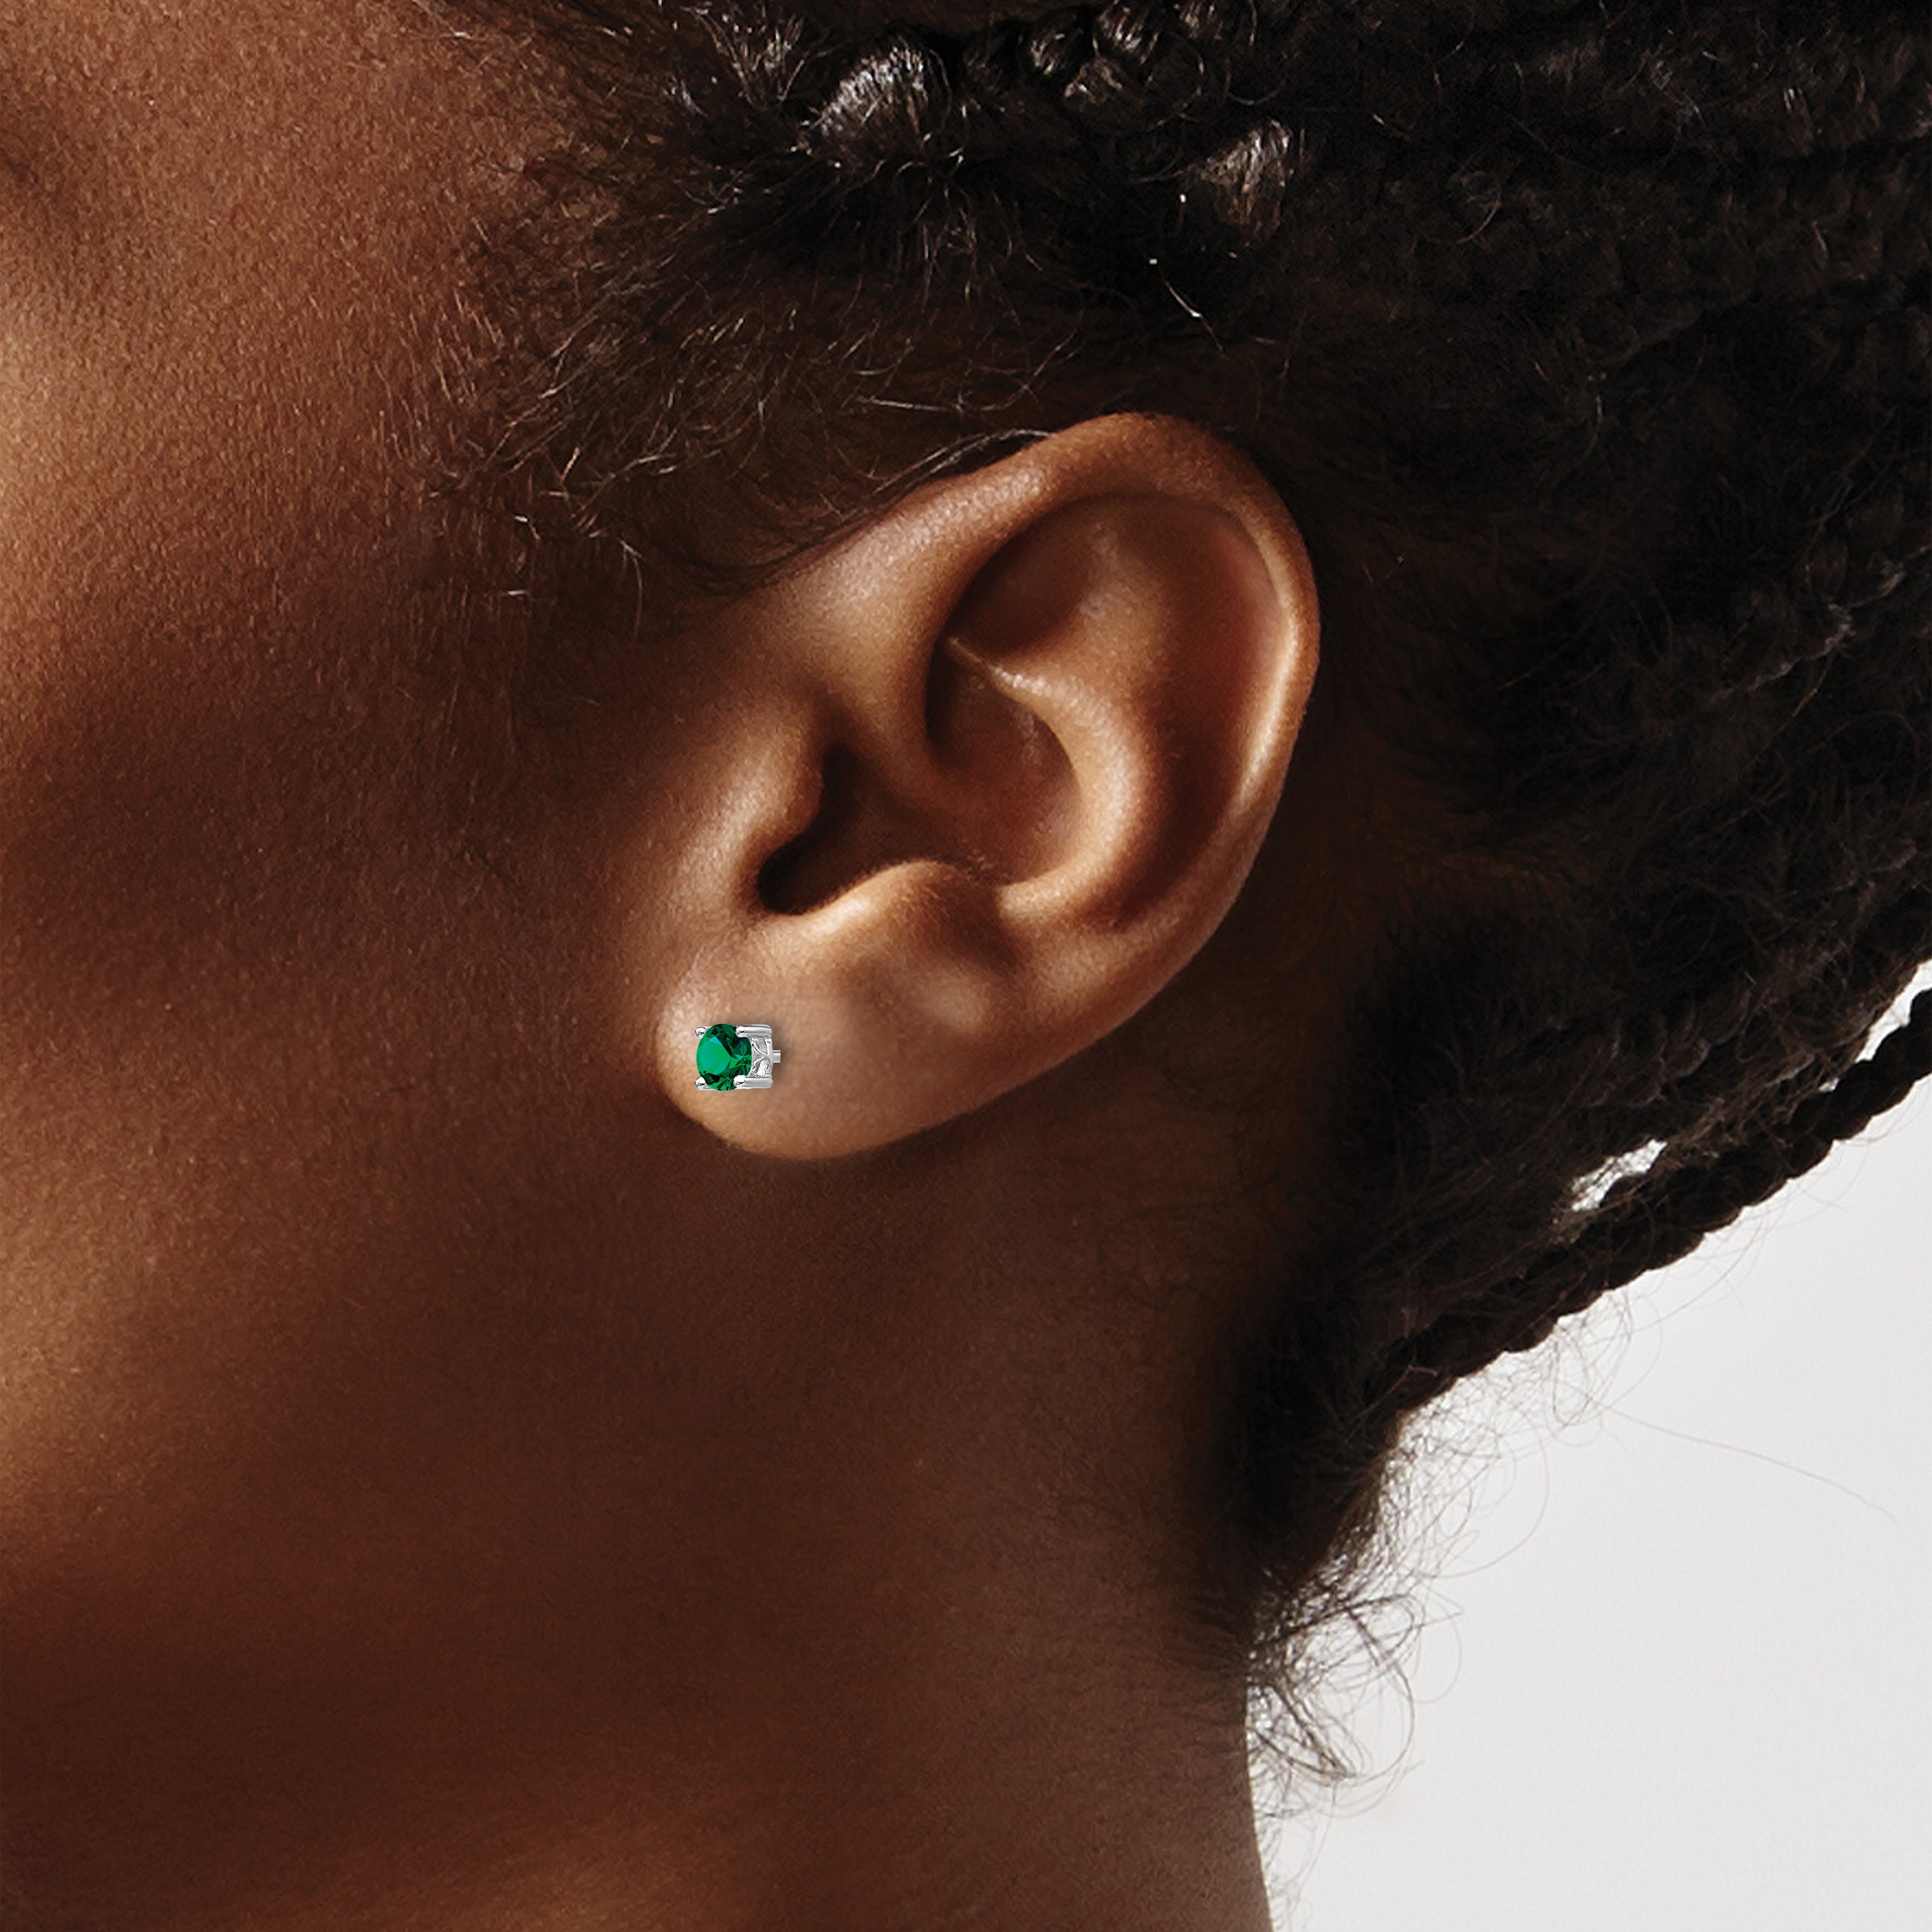 Sterling Silver Rhodium-plated 4mm Round Created Emerald Post Earrings